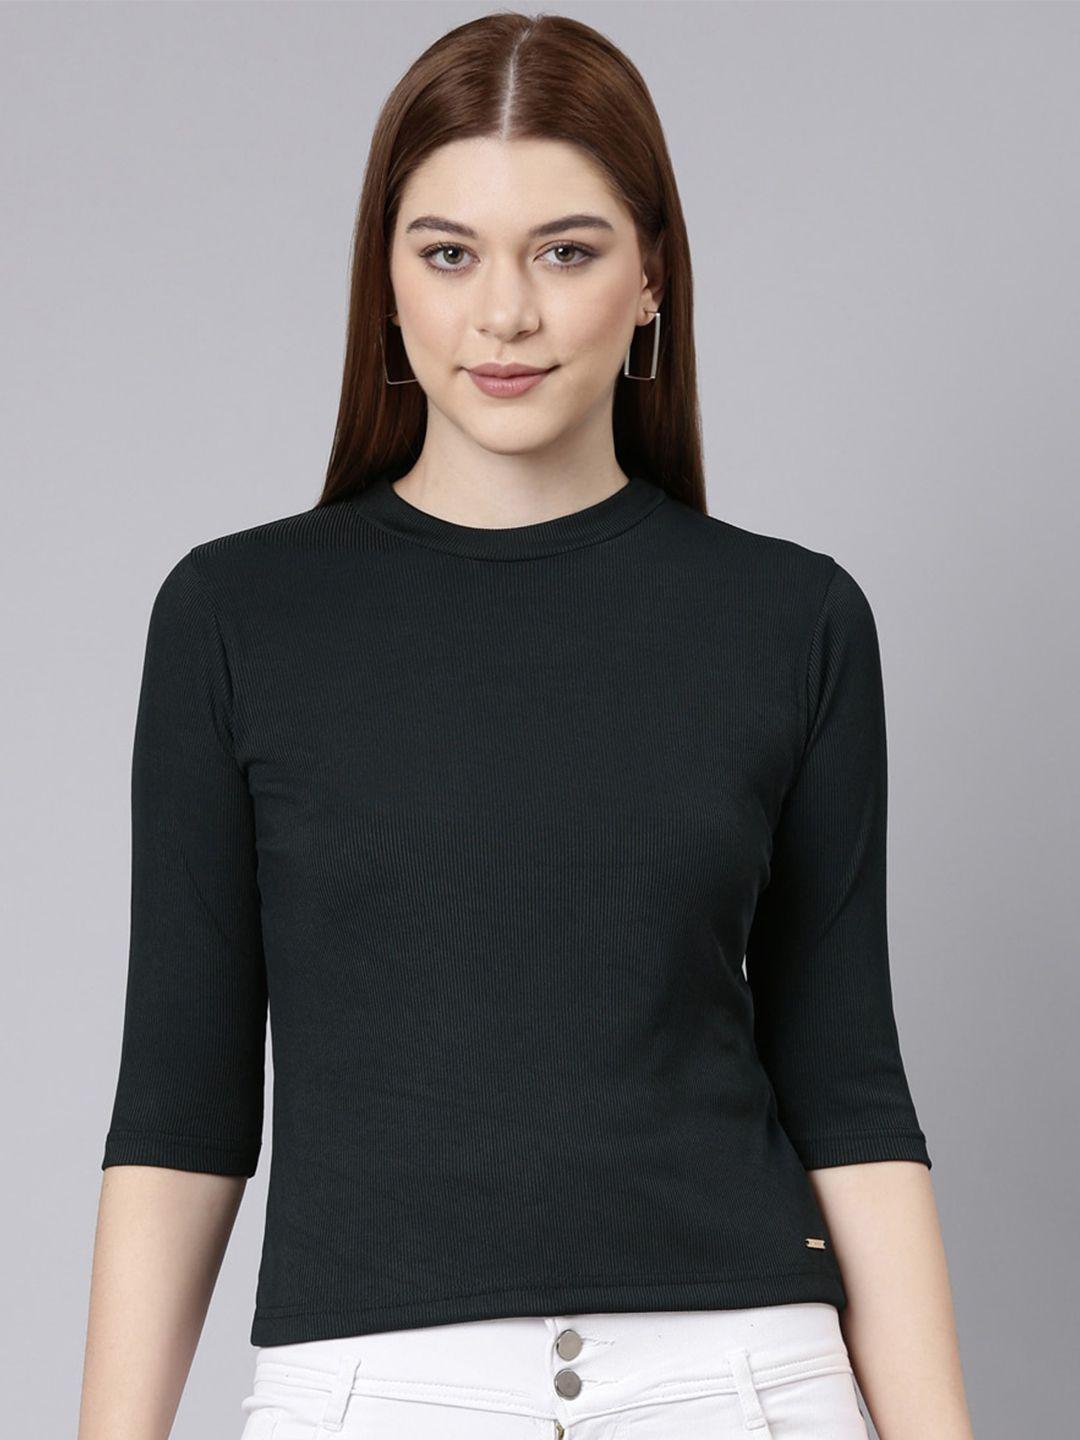 twin birds high neck ribbed fitted top